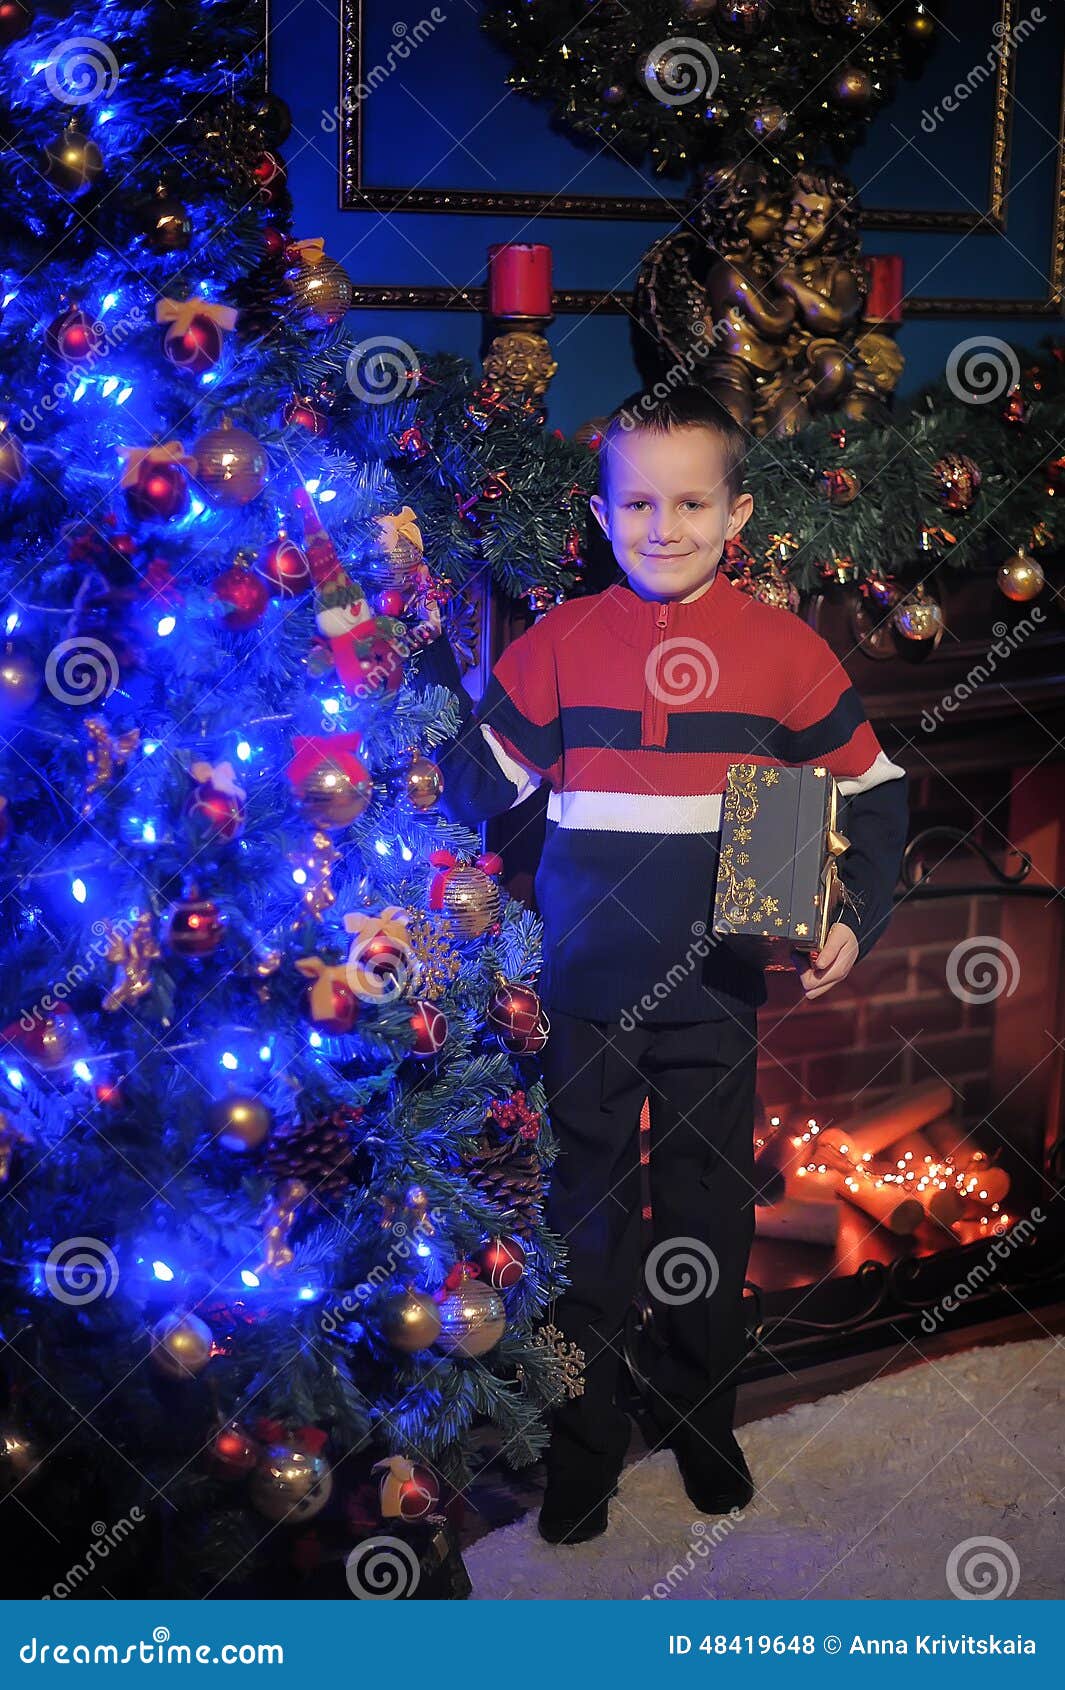 The boy next to a glowing blue Christmas tree and fireplace. Boy in a chair near the Christmas tree